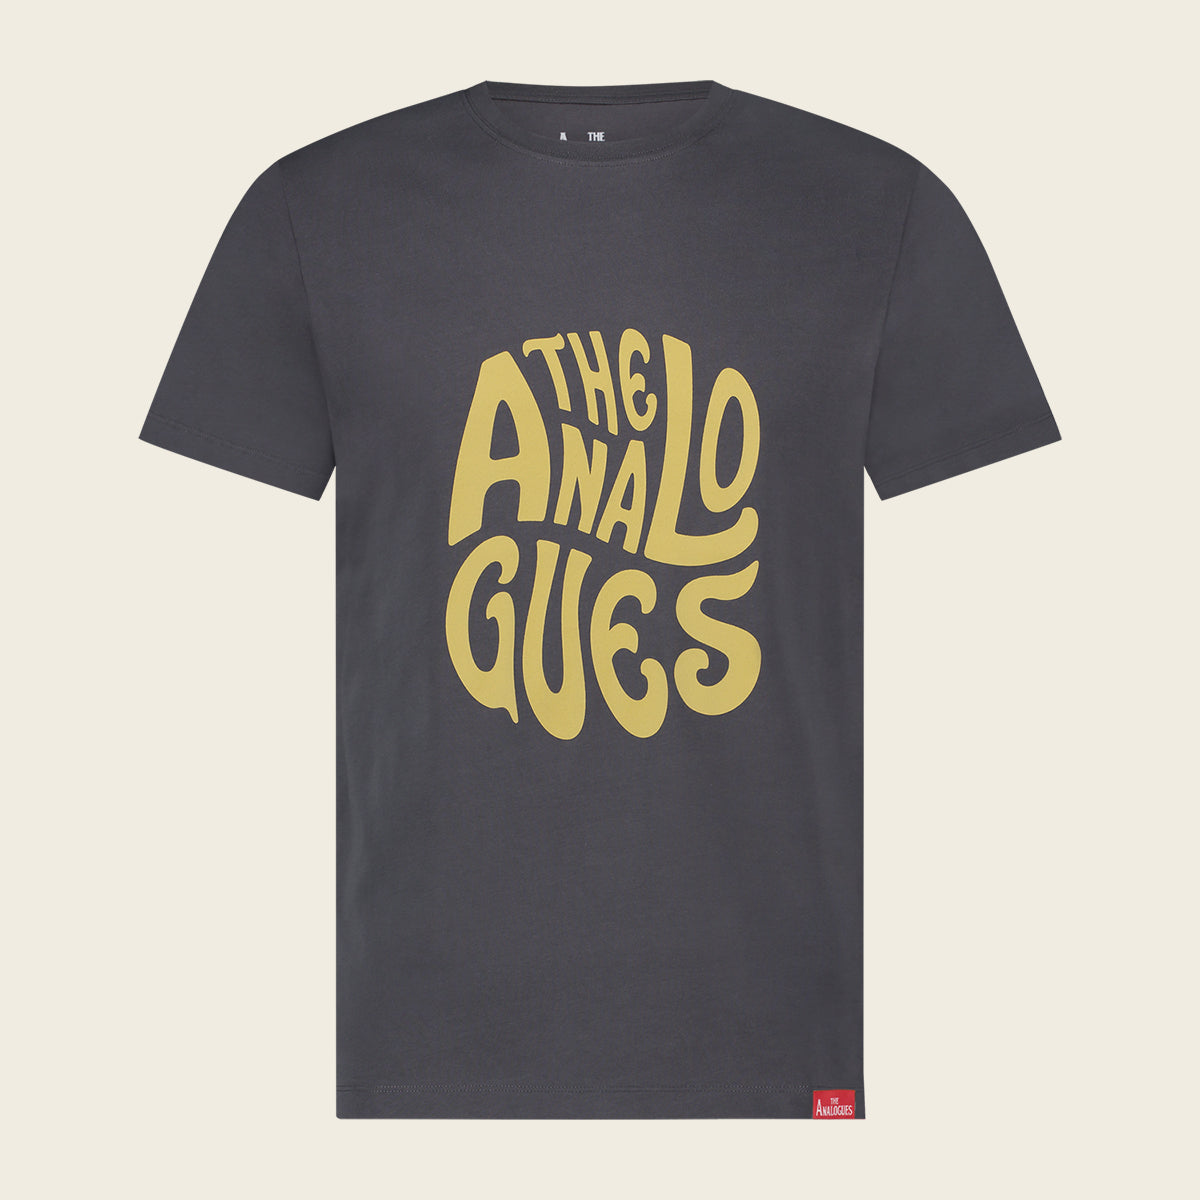 The Analogues Psych Logo T-shirt Grey